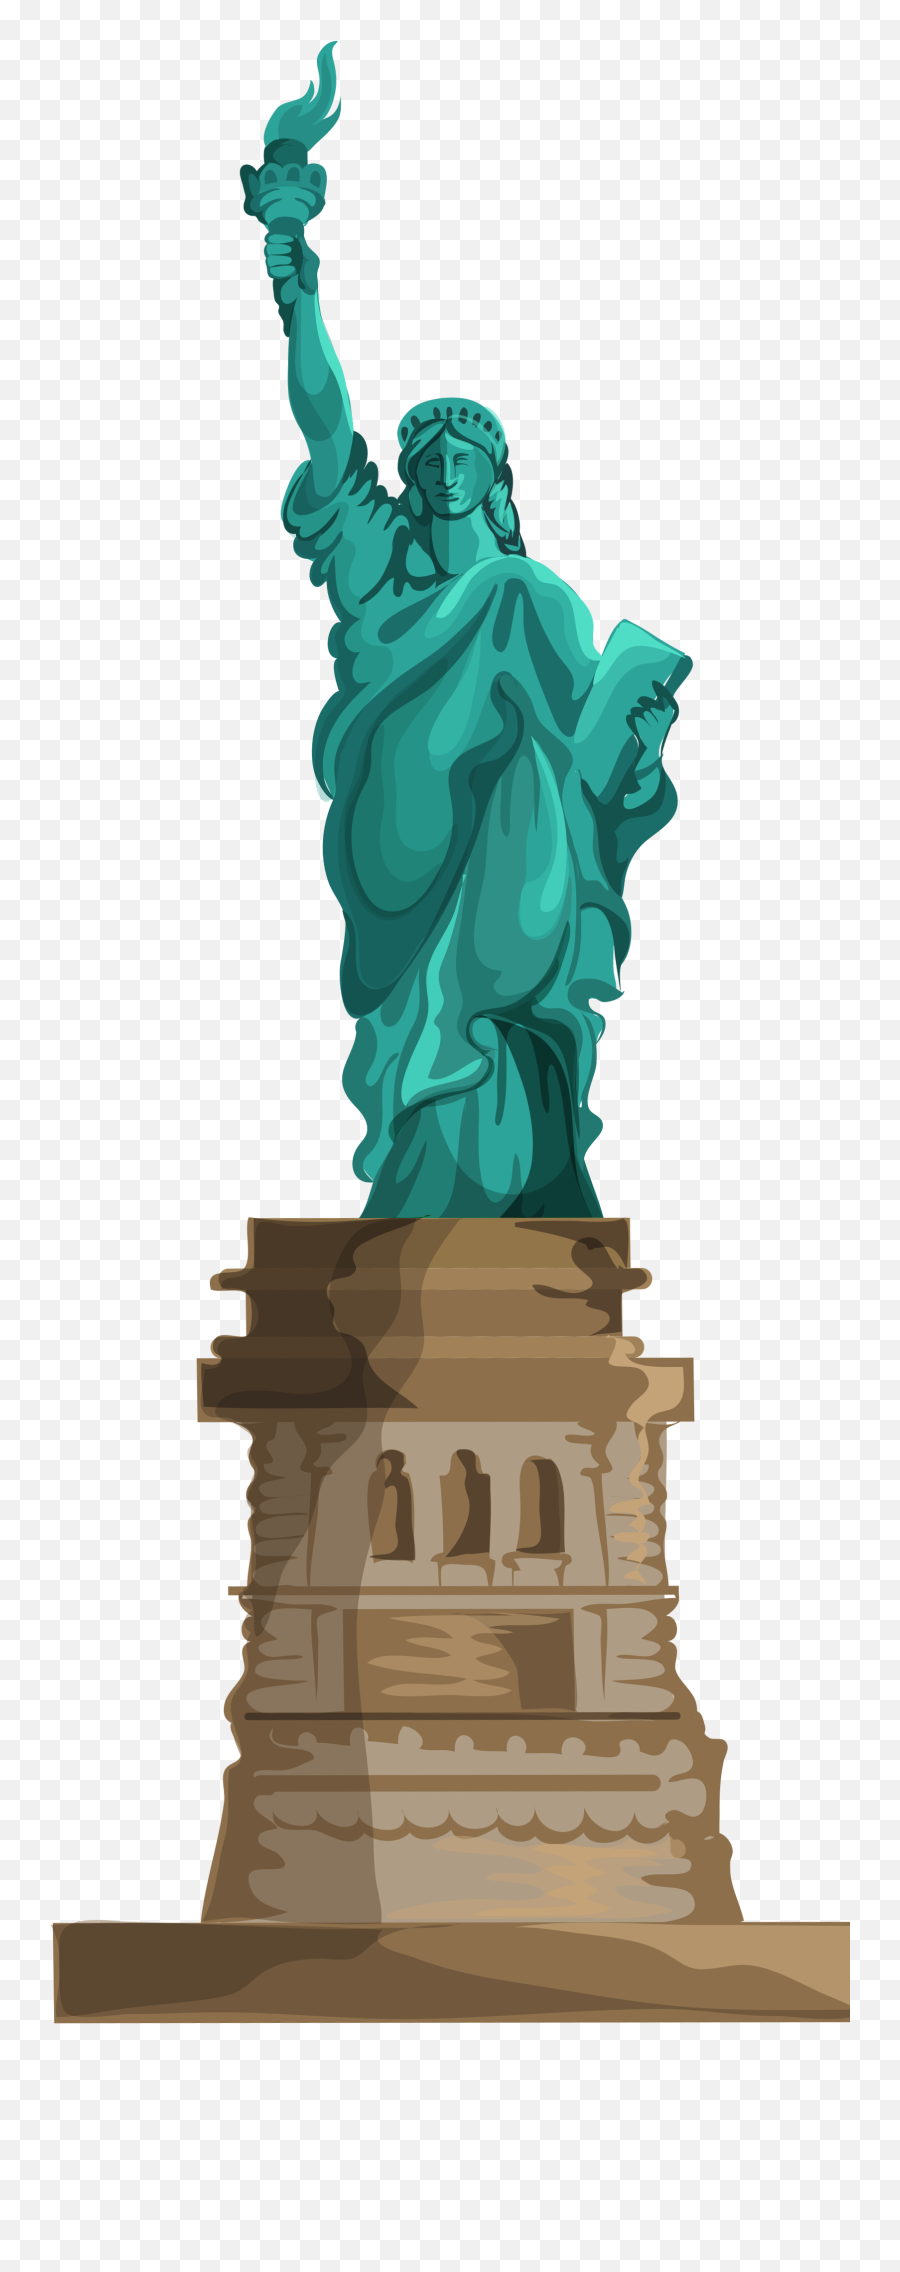 Hd Statue Of Liberty Transparent - Statue Of Liberty Transparent Png,Statue Of Liberty Transparent